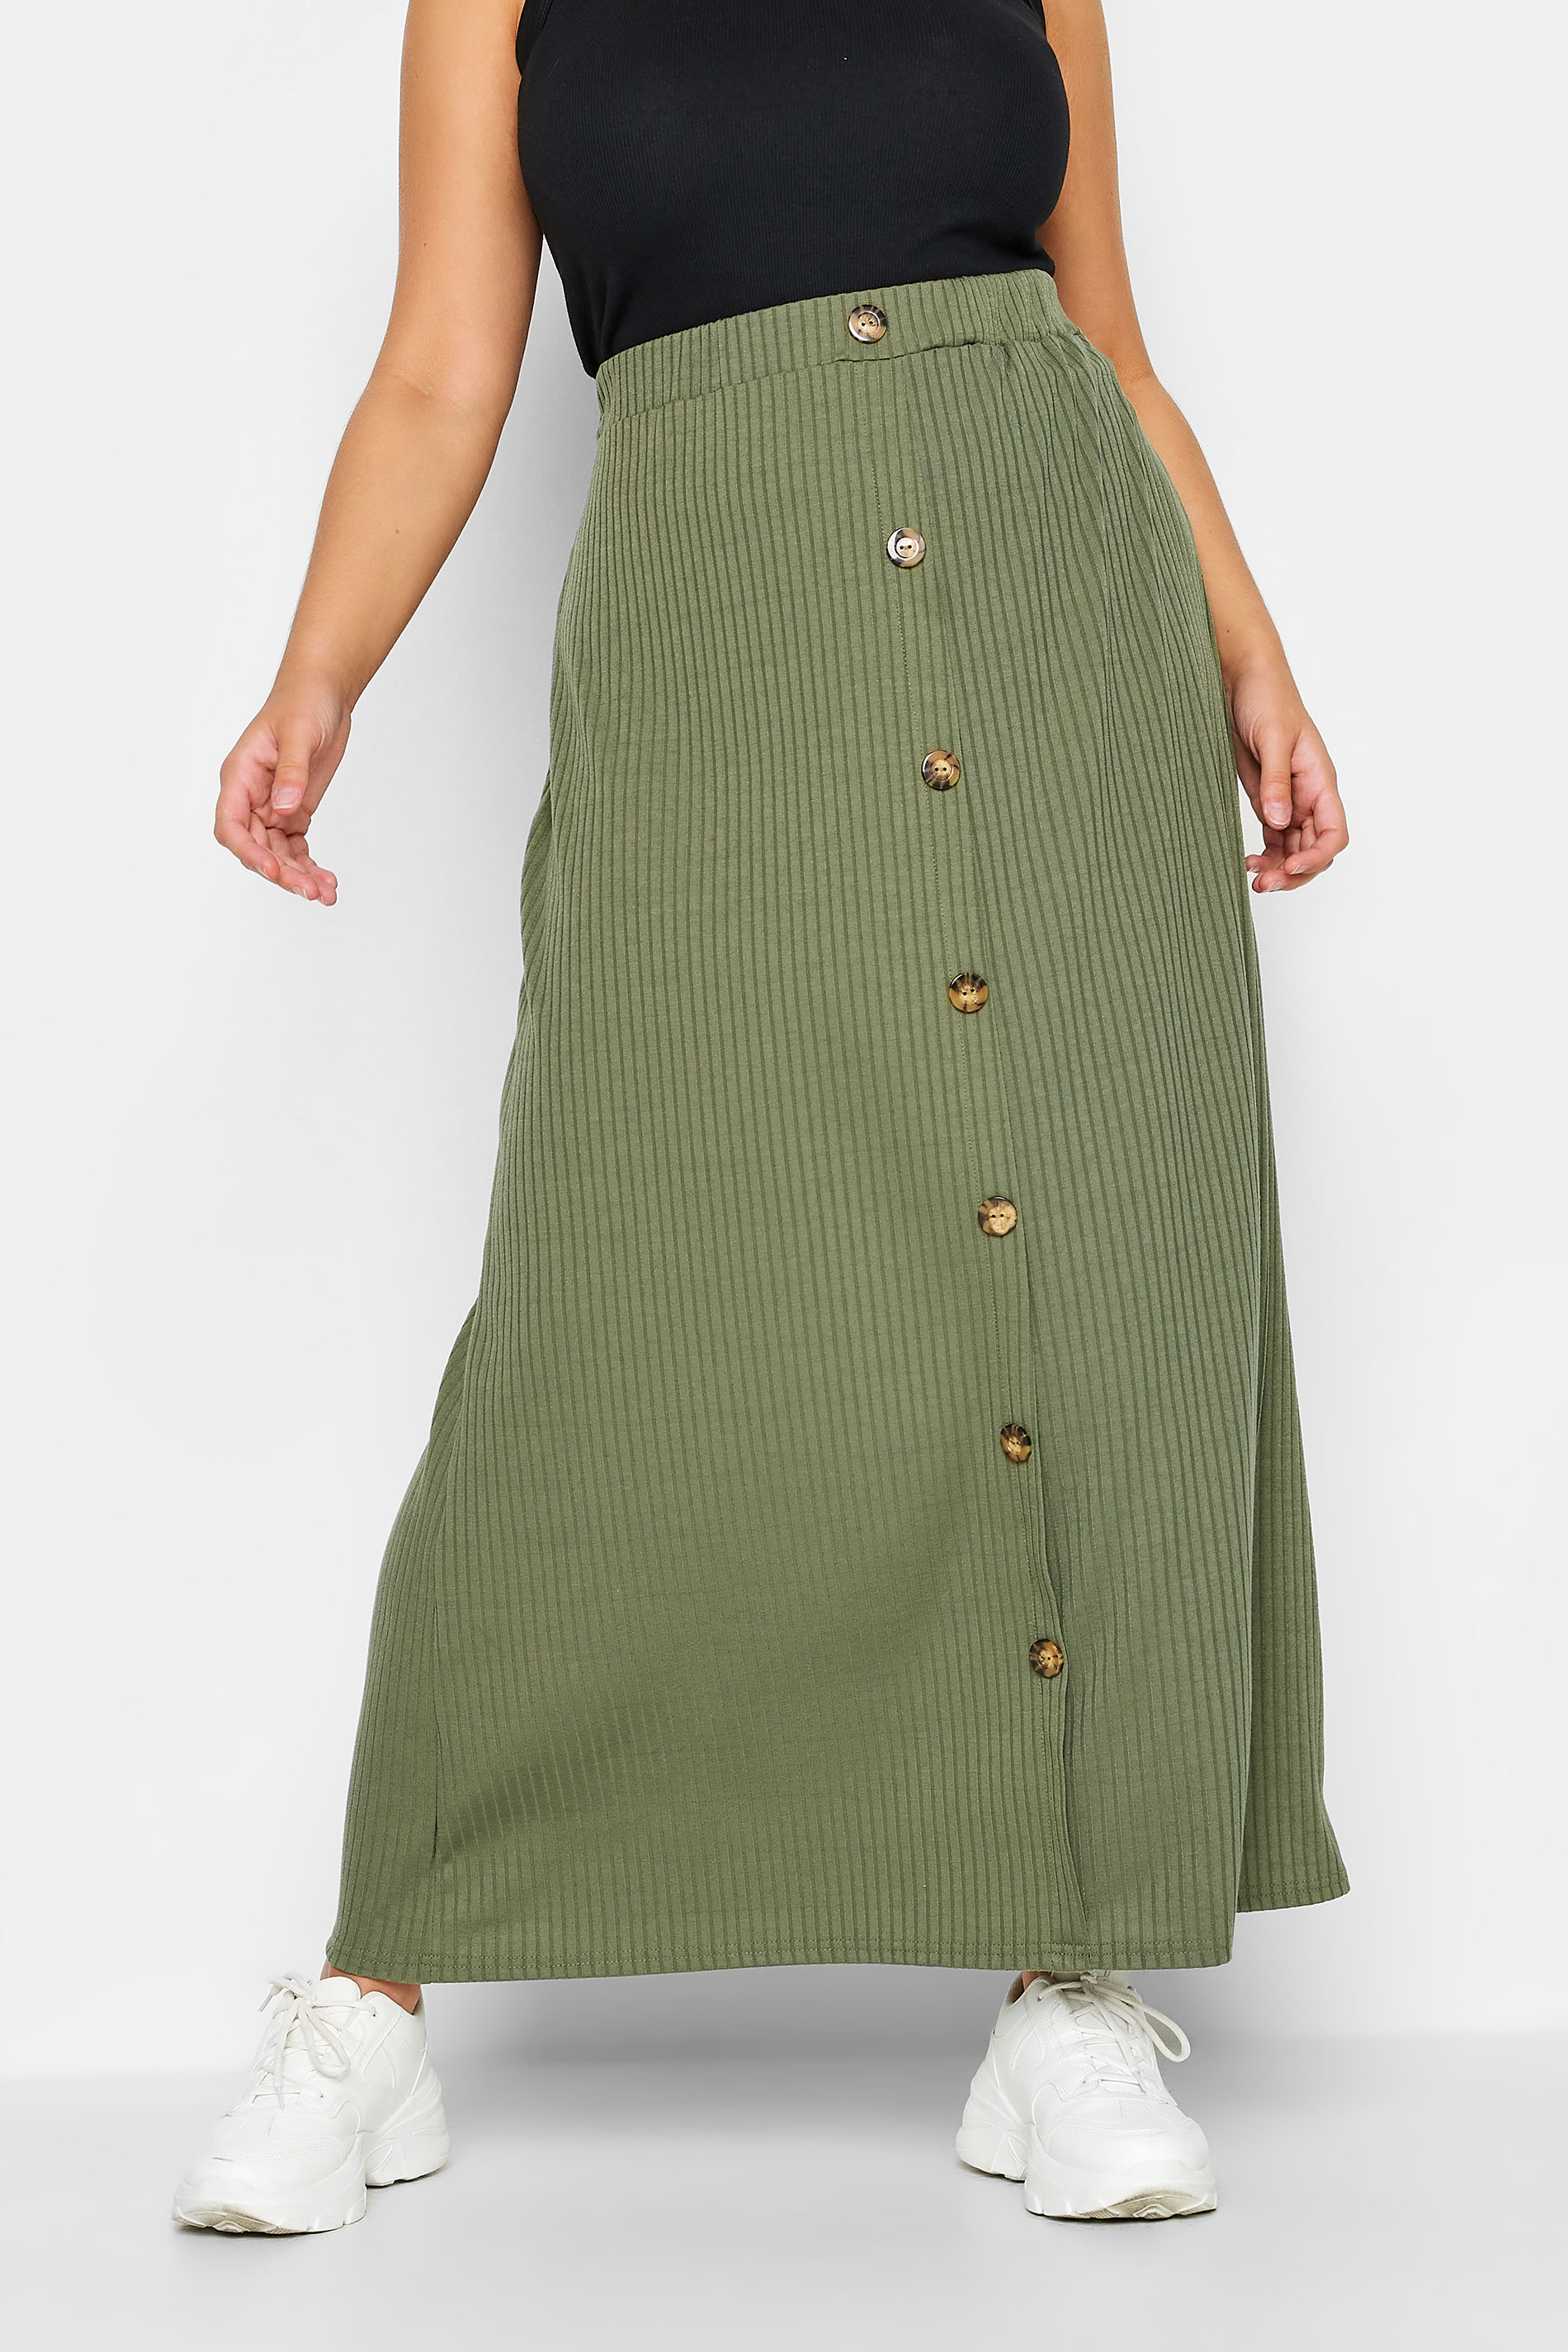 LIMITED COLLECTION Plus Size Khaki Green Button Down Maxi Skirt | Yours Clothing 1